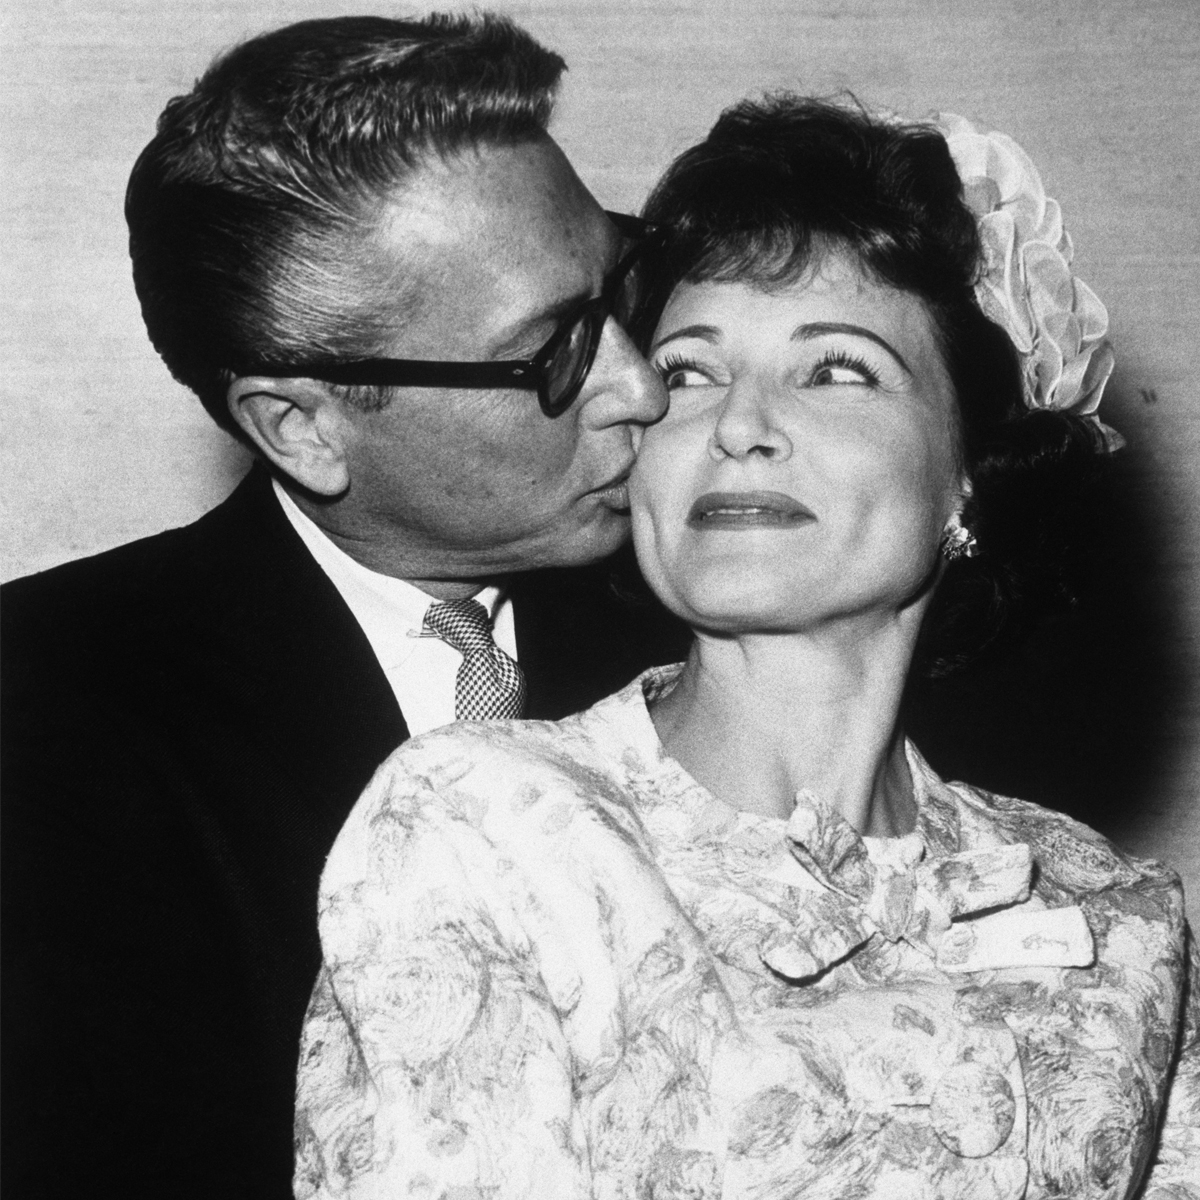 Betty White's Lasting Love Story With Allen Ludden: Why Her Third Husband Was Her One and Only